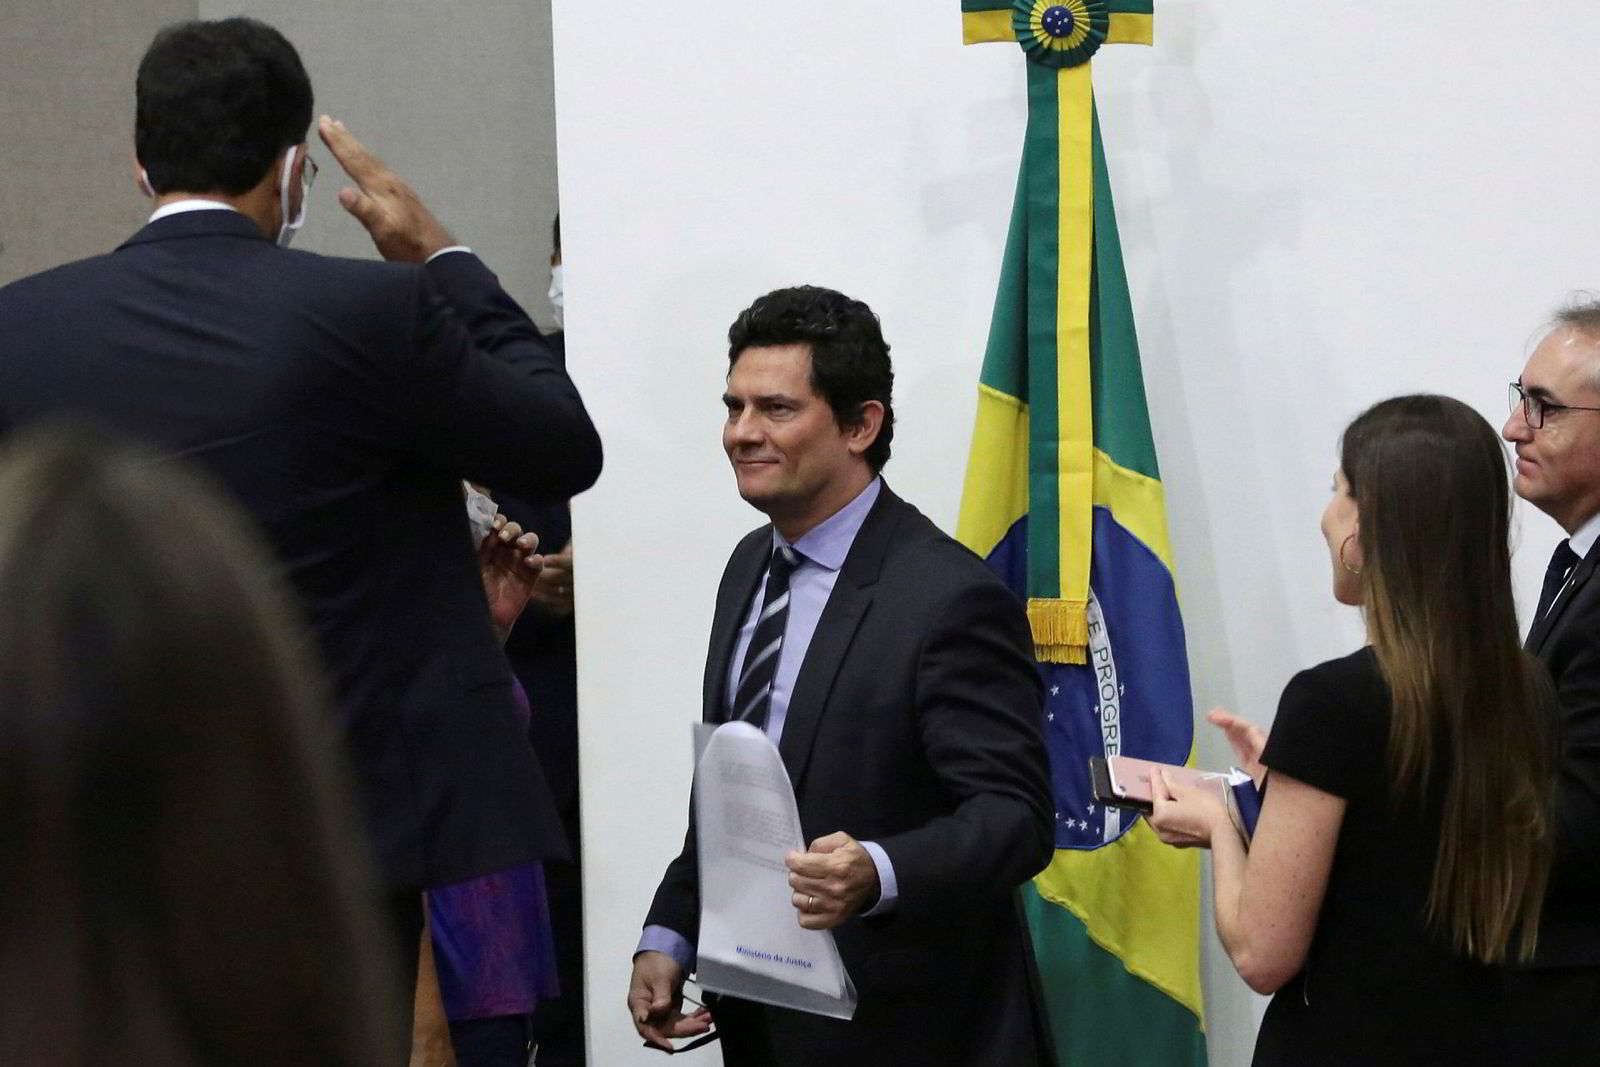 Brazil's former Justice Minister Sergio Moro was knocked out of office by his staff when he resigned on Friday.